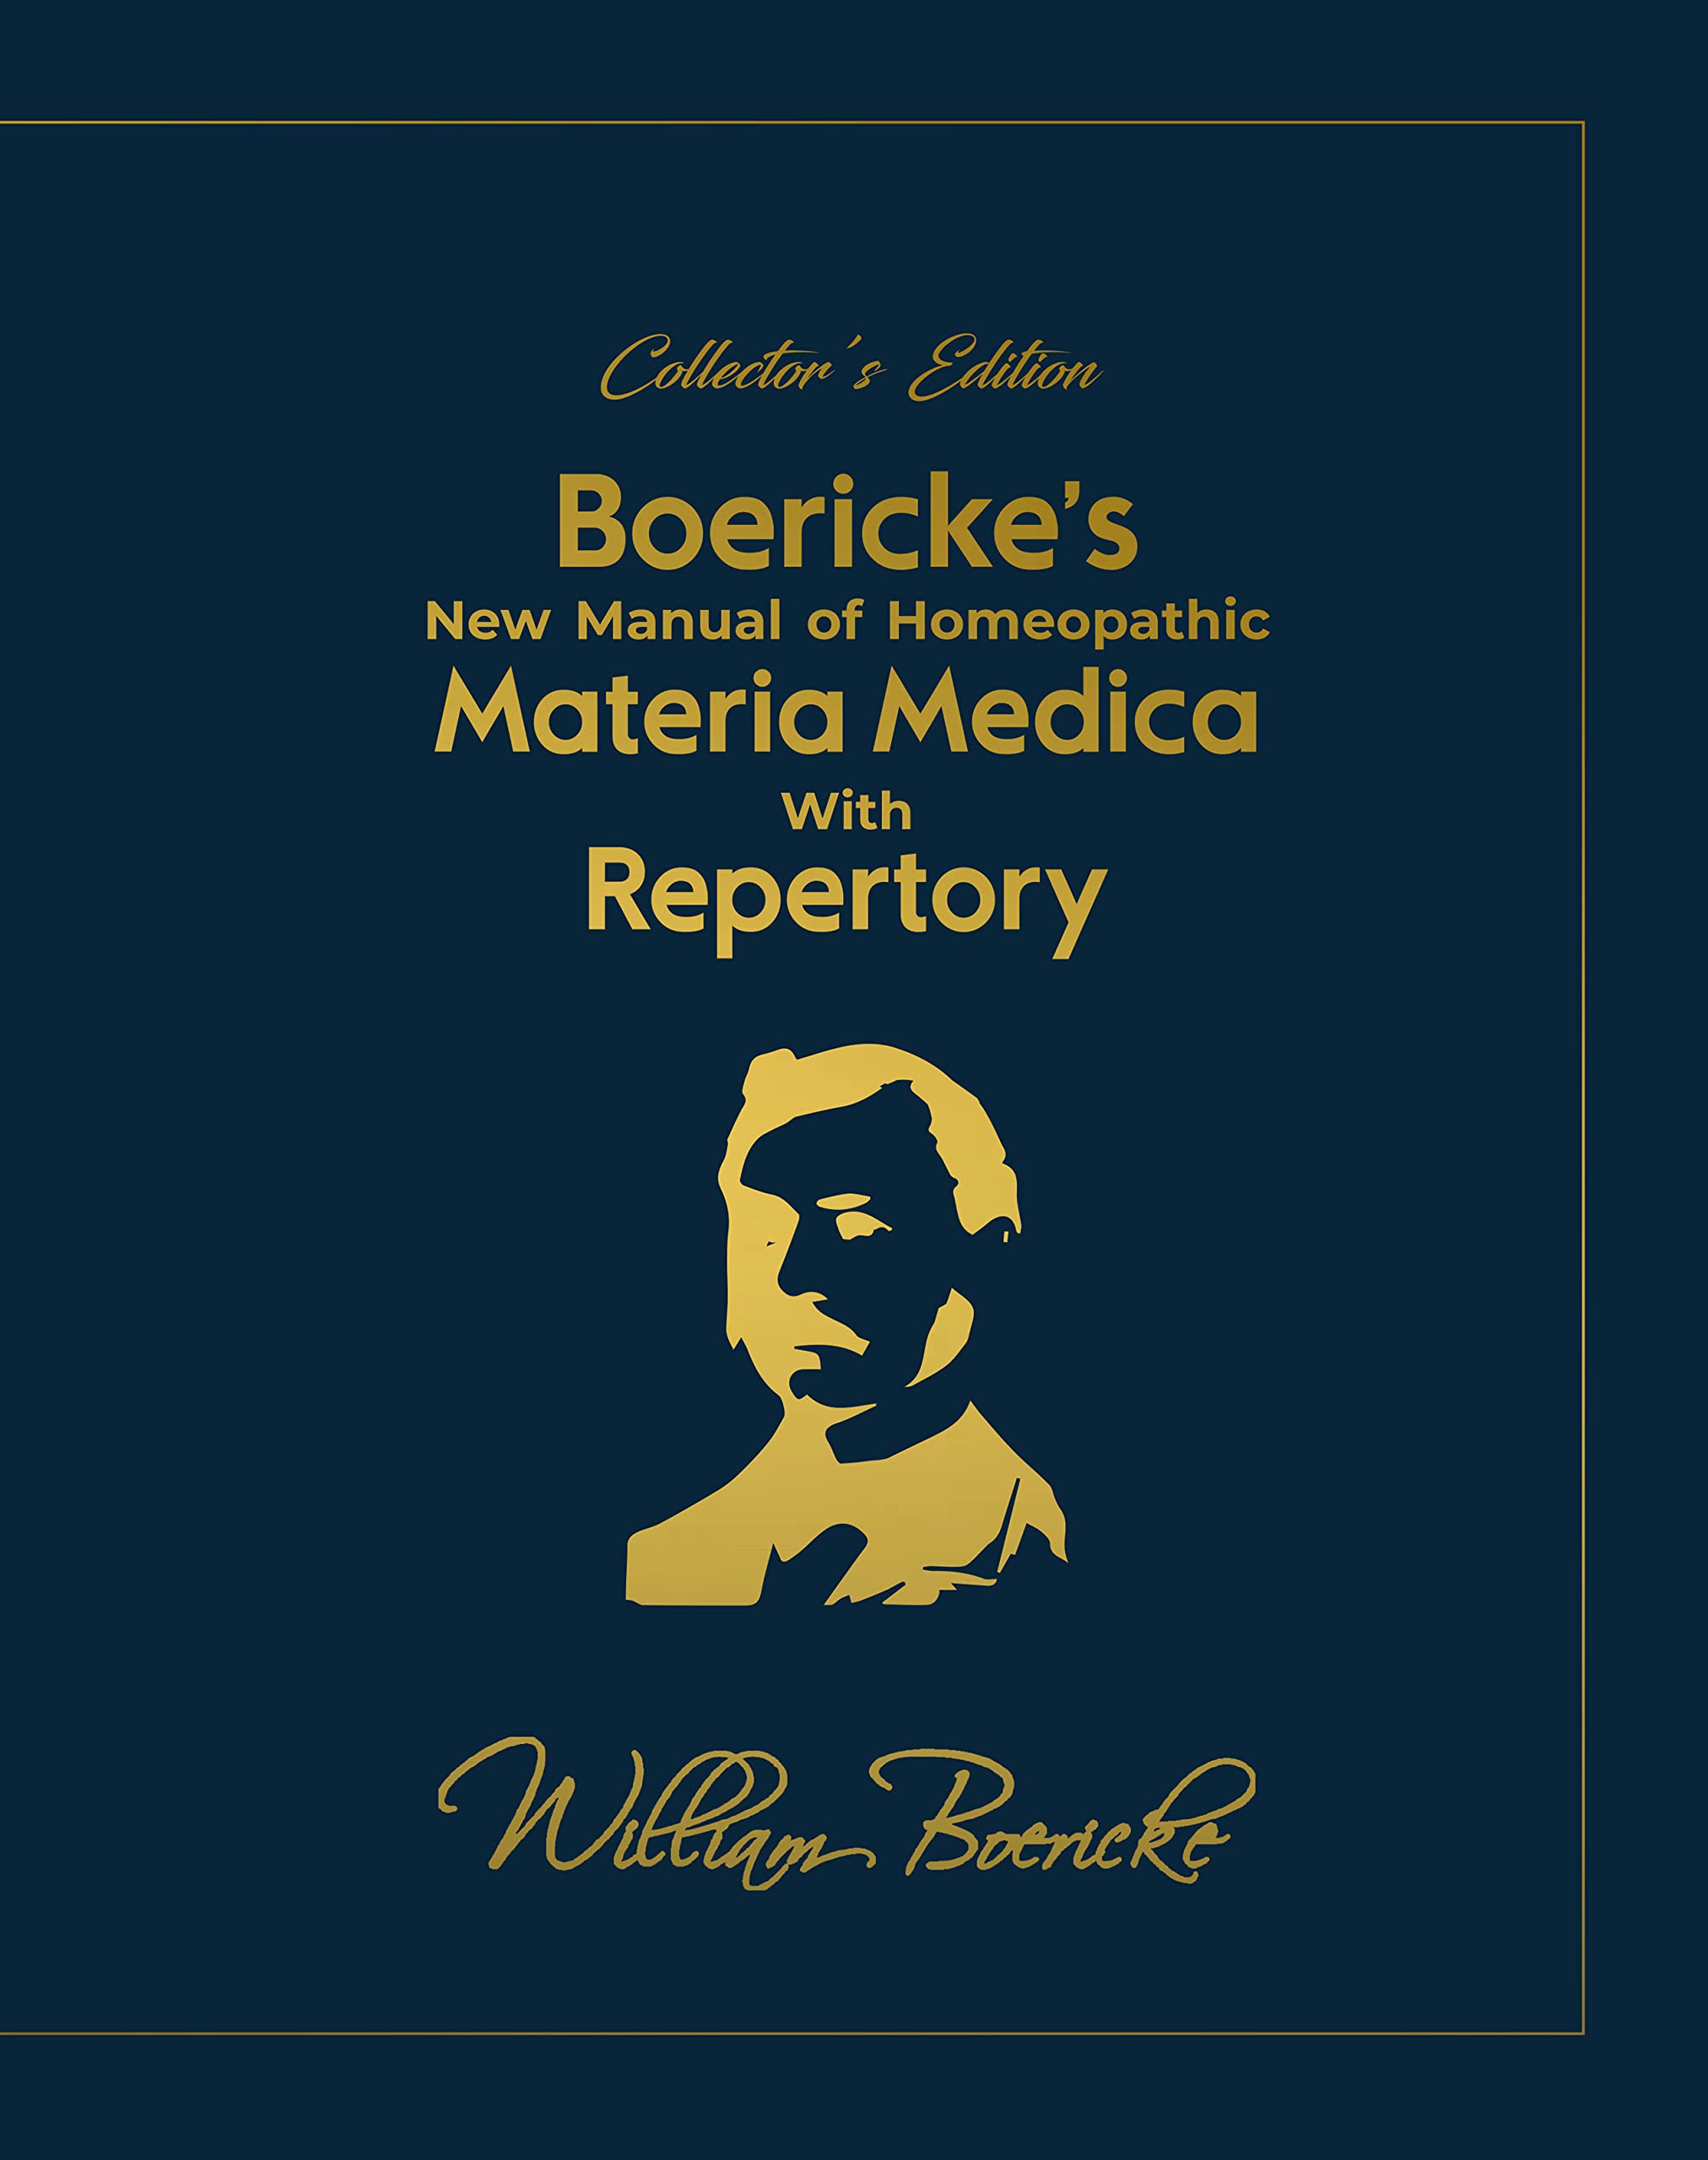 collectors-edition-boerickes-new-manual-of-homeopathic-materia-medica-with-repertory